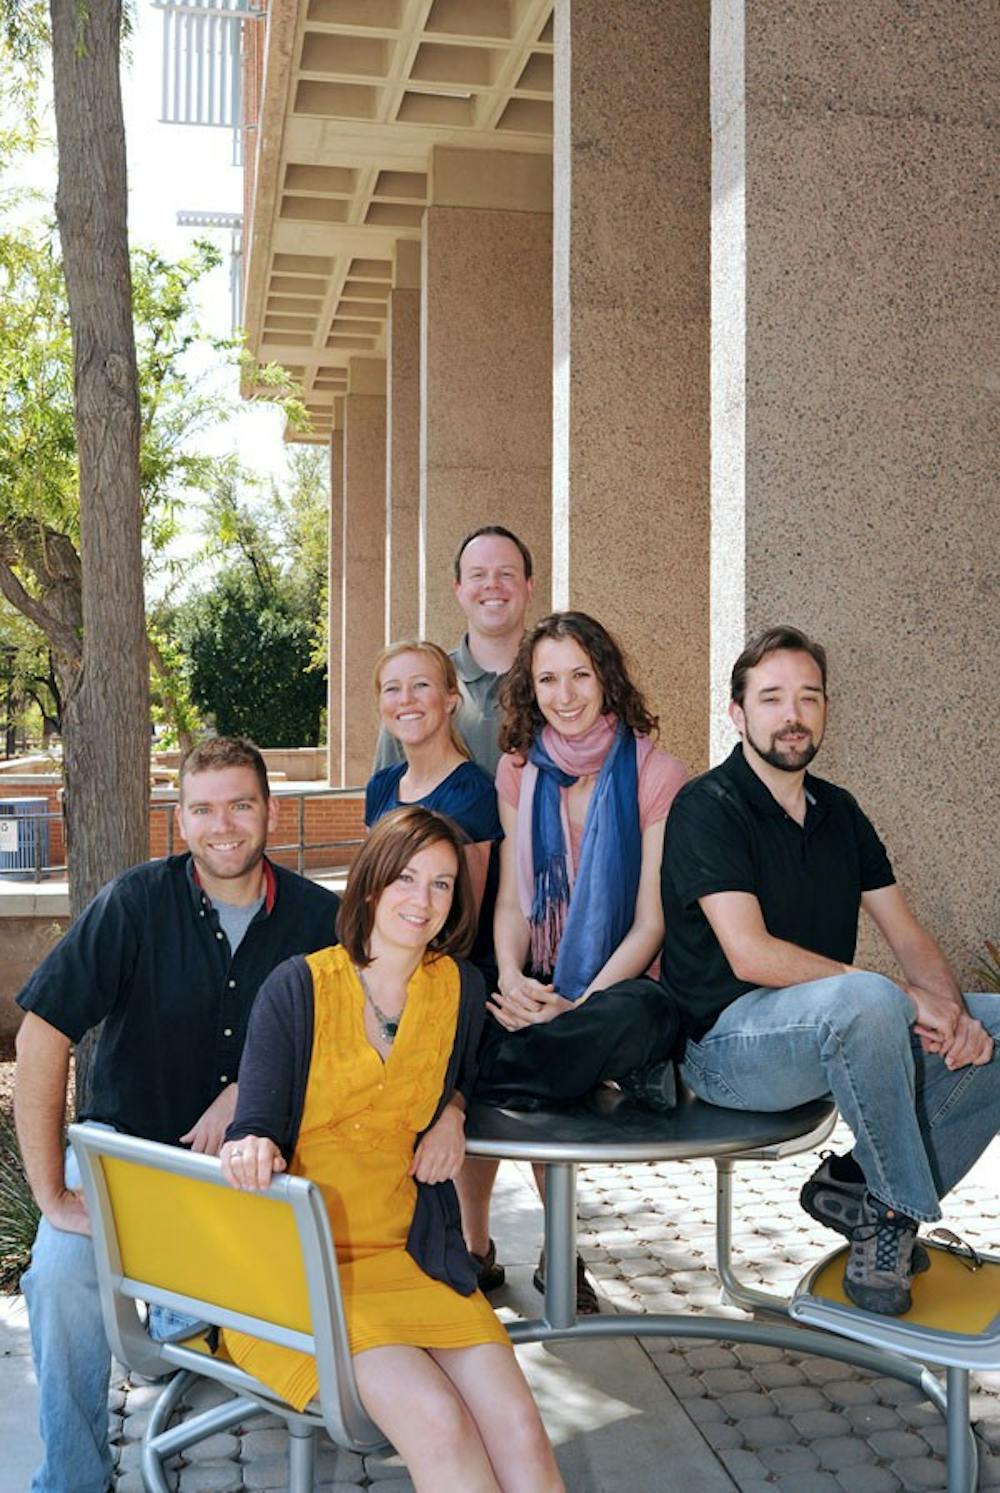 GREEN JOURNAL: (Pictured from left to right) Robert Homer, Maren Mahoney, Haley Paul, Robert Meyers, Sandra Rodegher and Zachary Hughes published the first issue of their online journal, The Sustainability Review, earlier in the month. (Photo Courtesy of Tim Trumble)